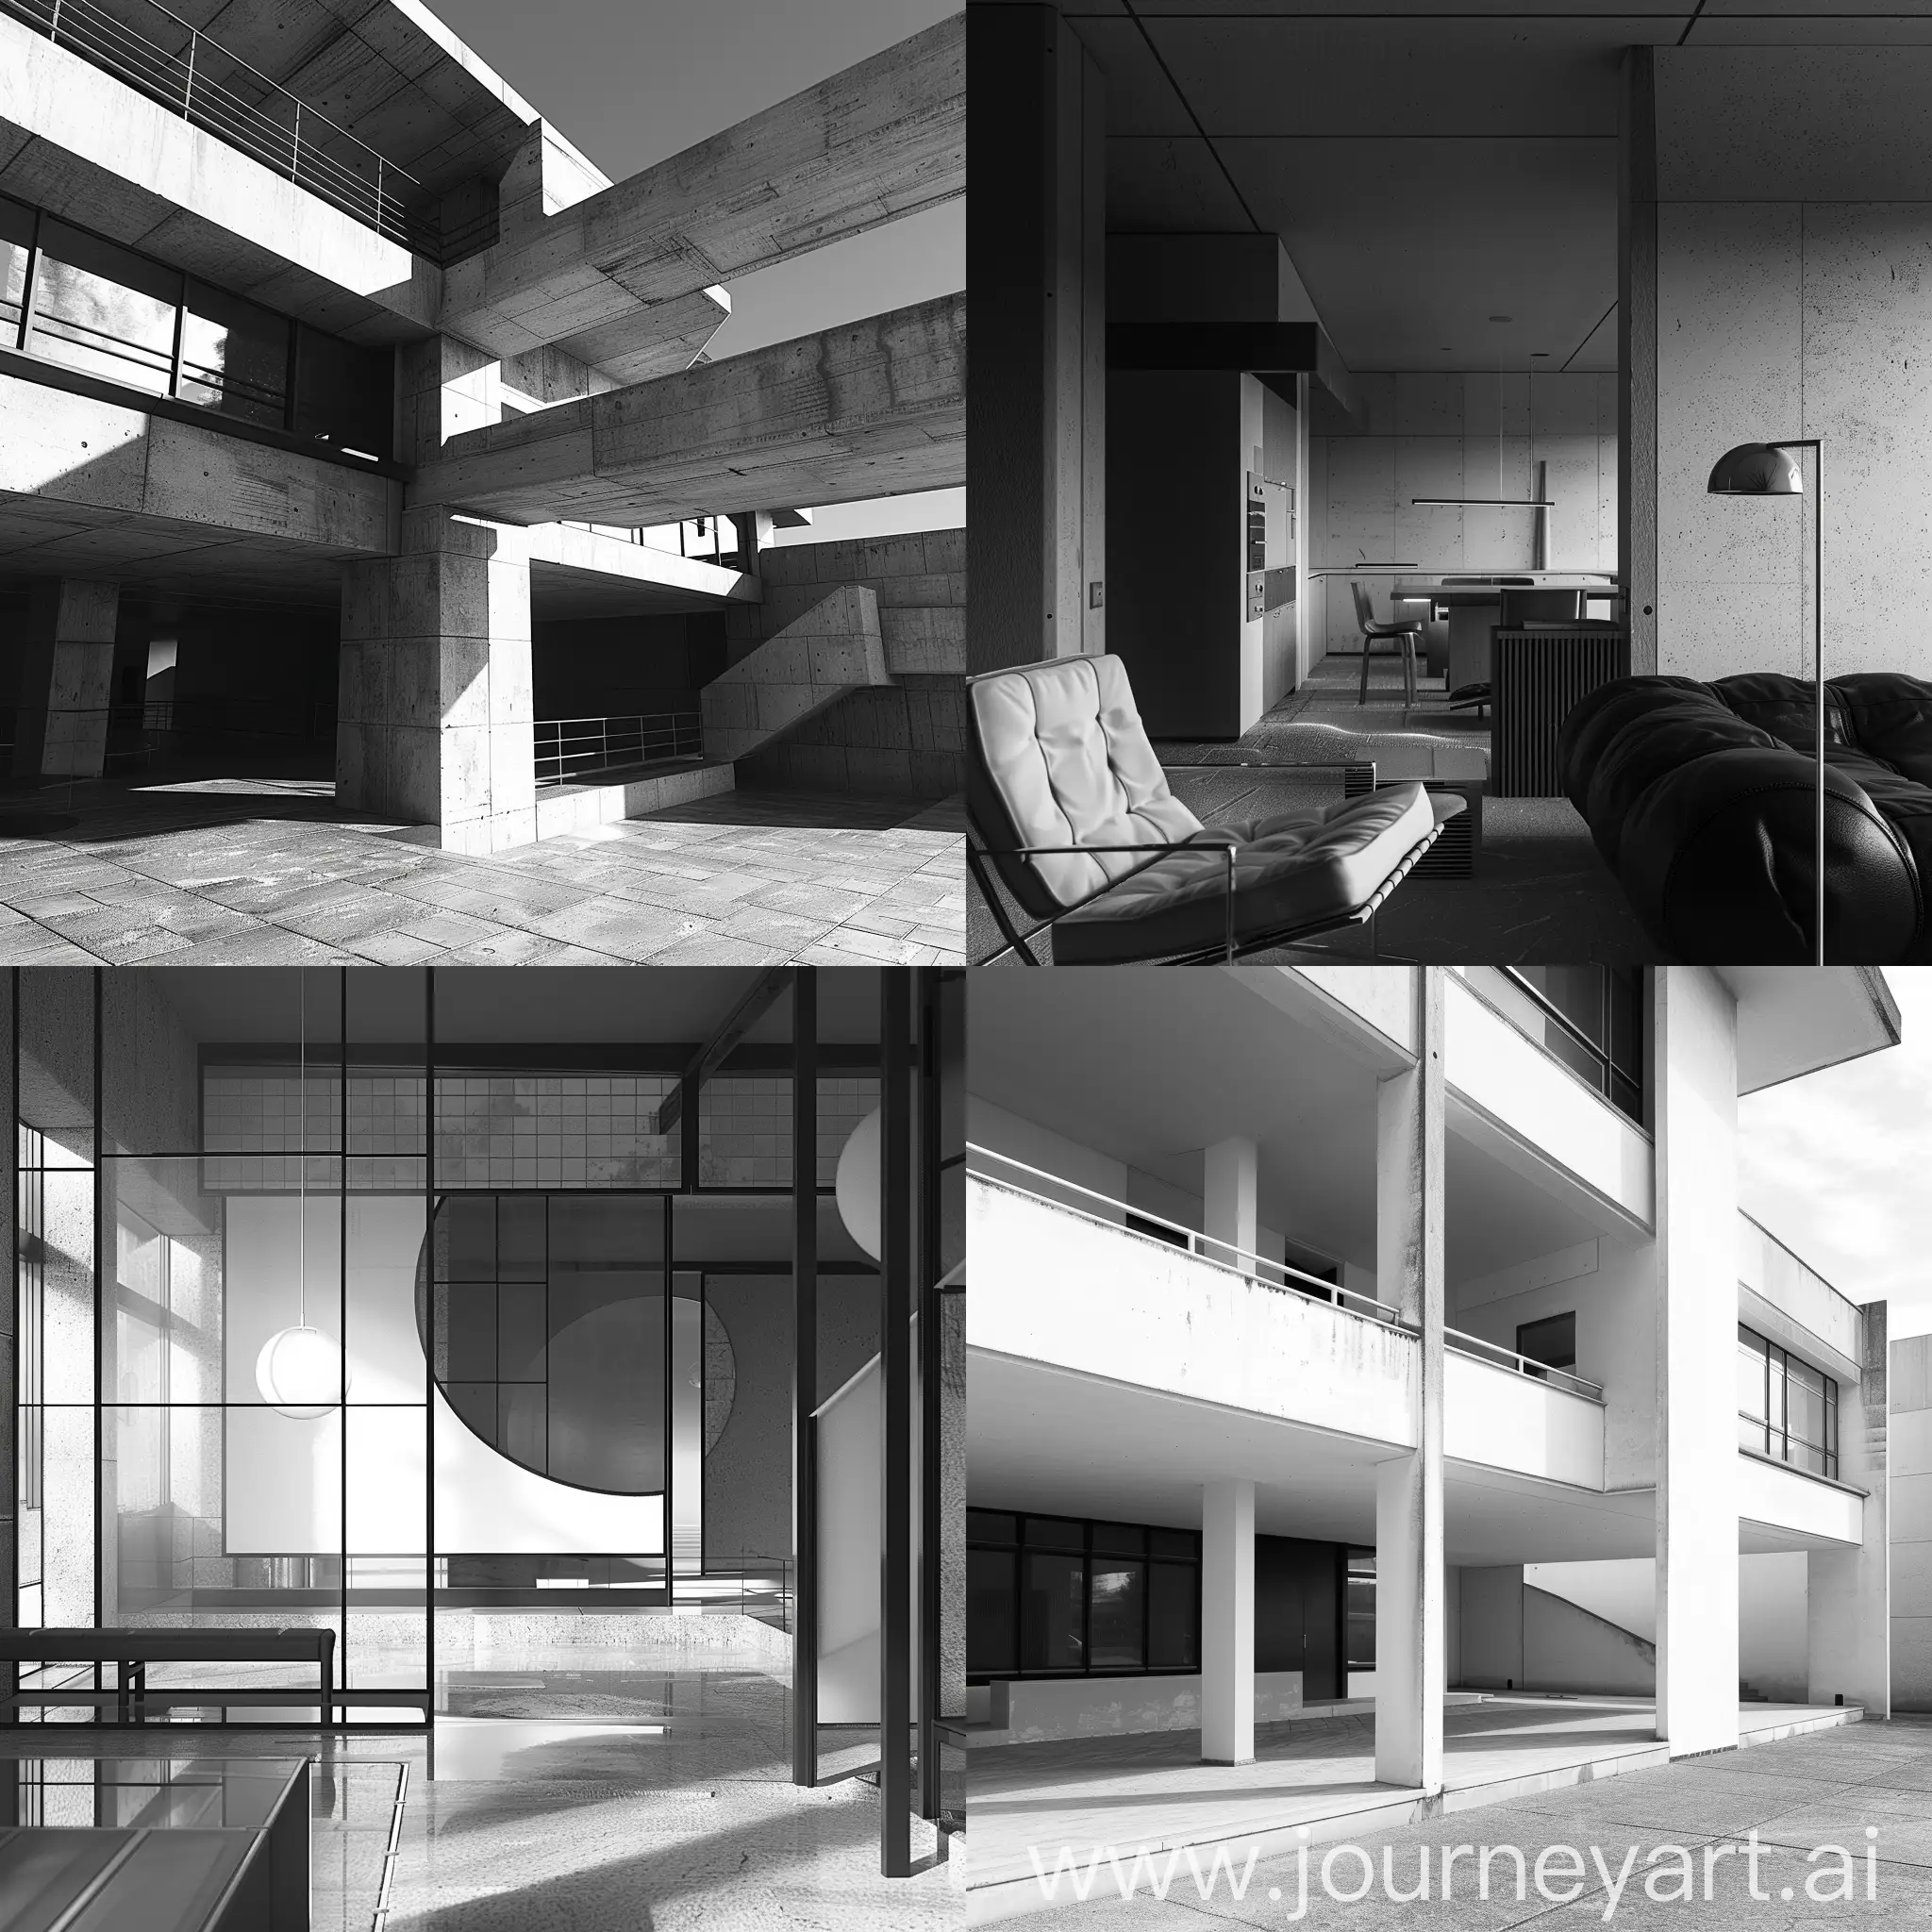 Photorealistic-Le-Corbusier-Portrait-in-Black-and-White-HyperDetailed-4K-Quality-Image